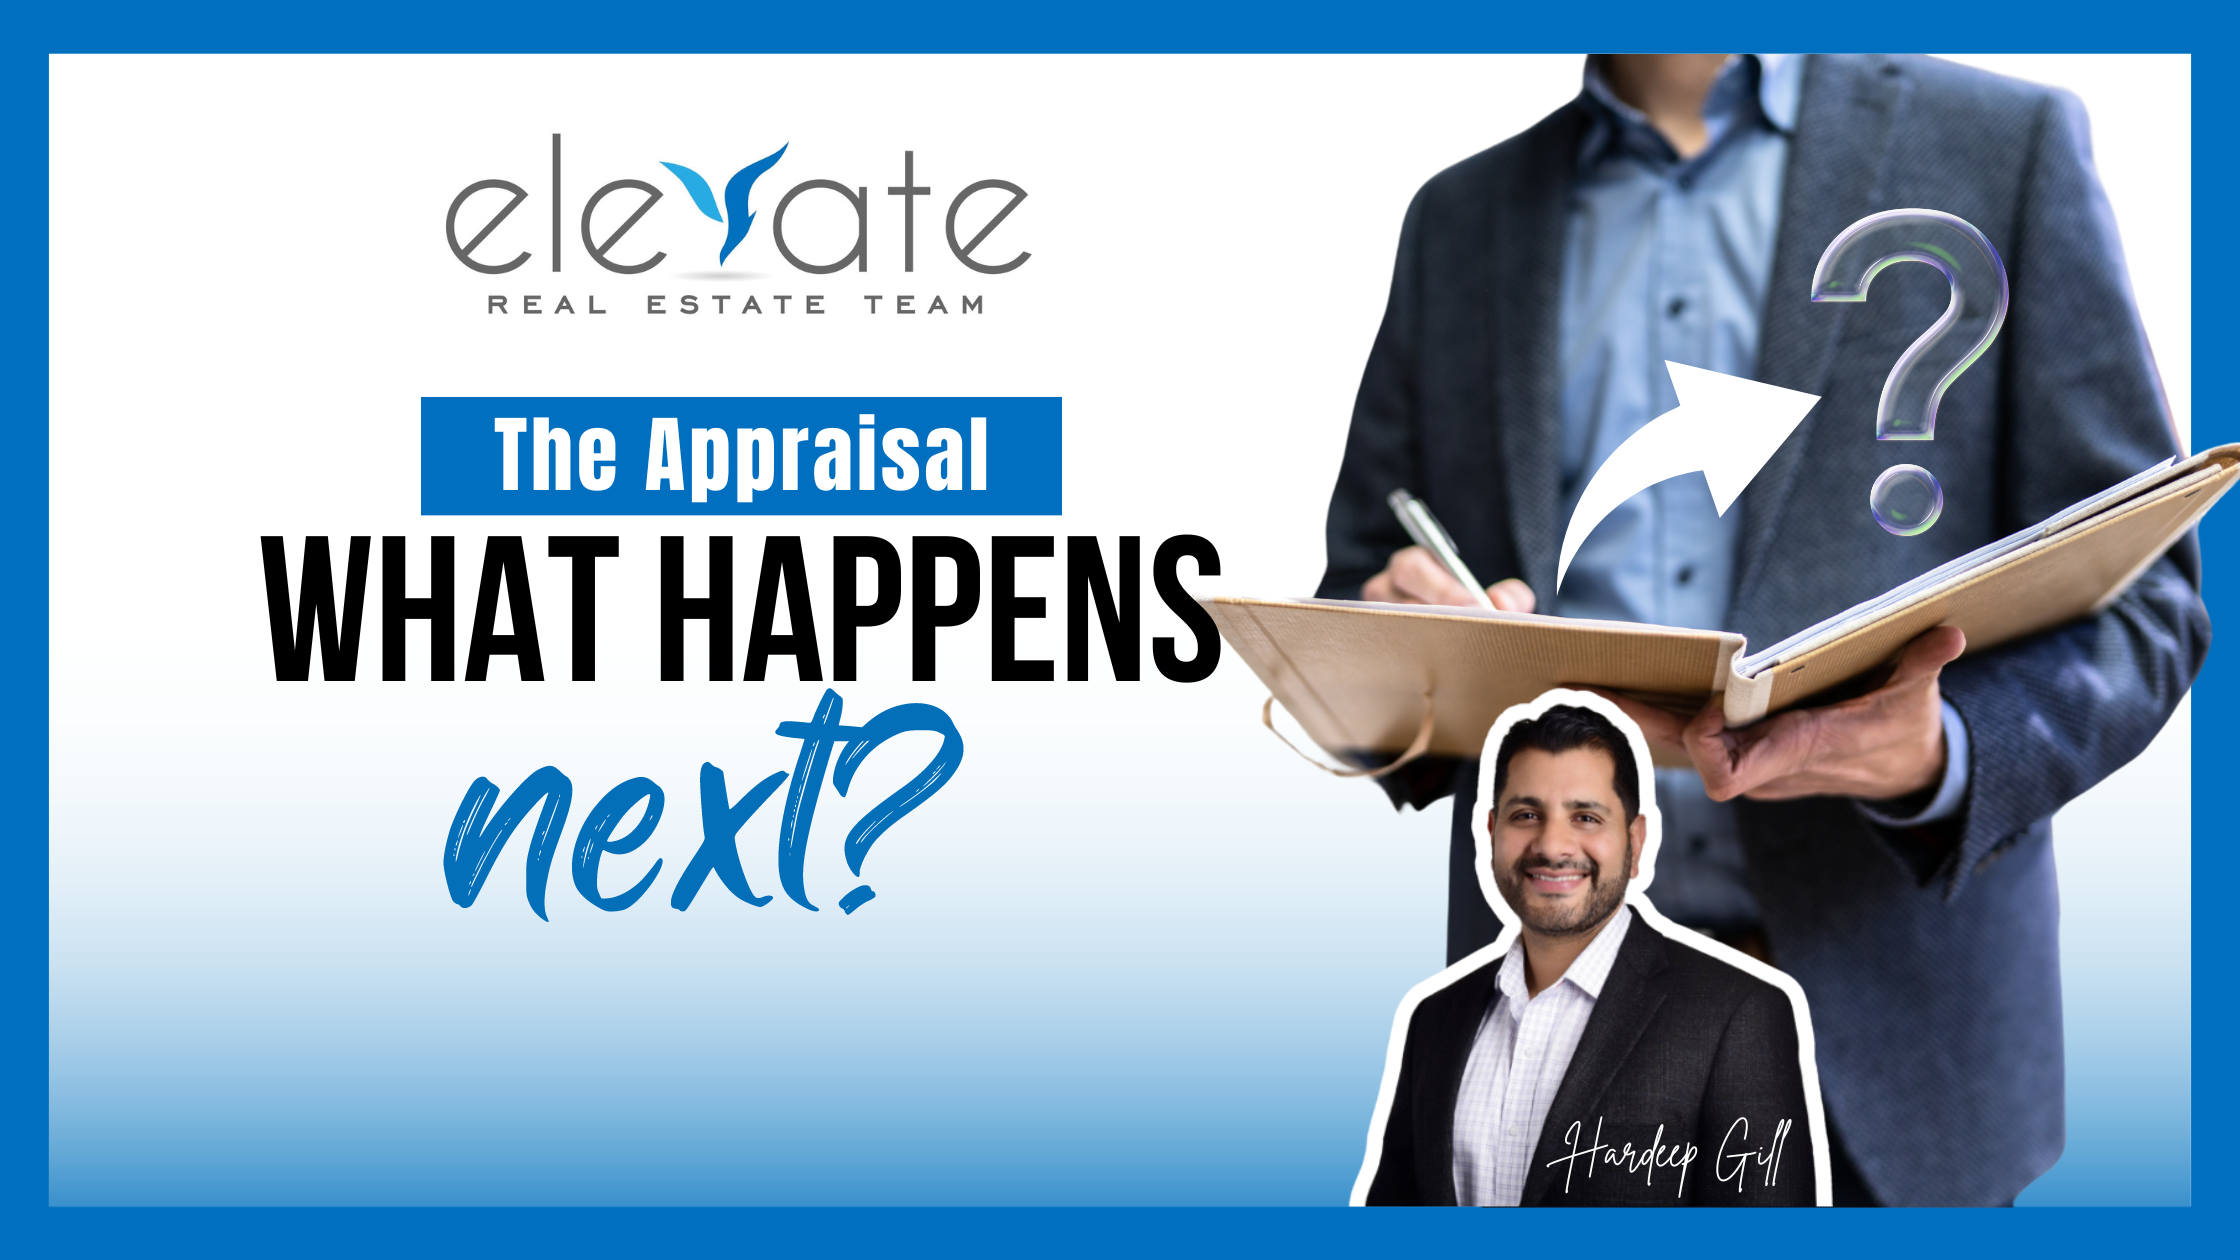 THE APPRAISAL What Happens Next?